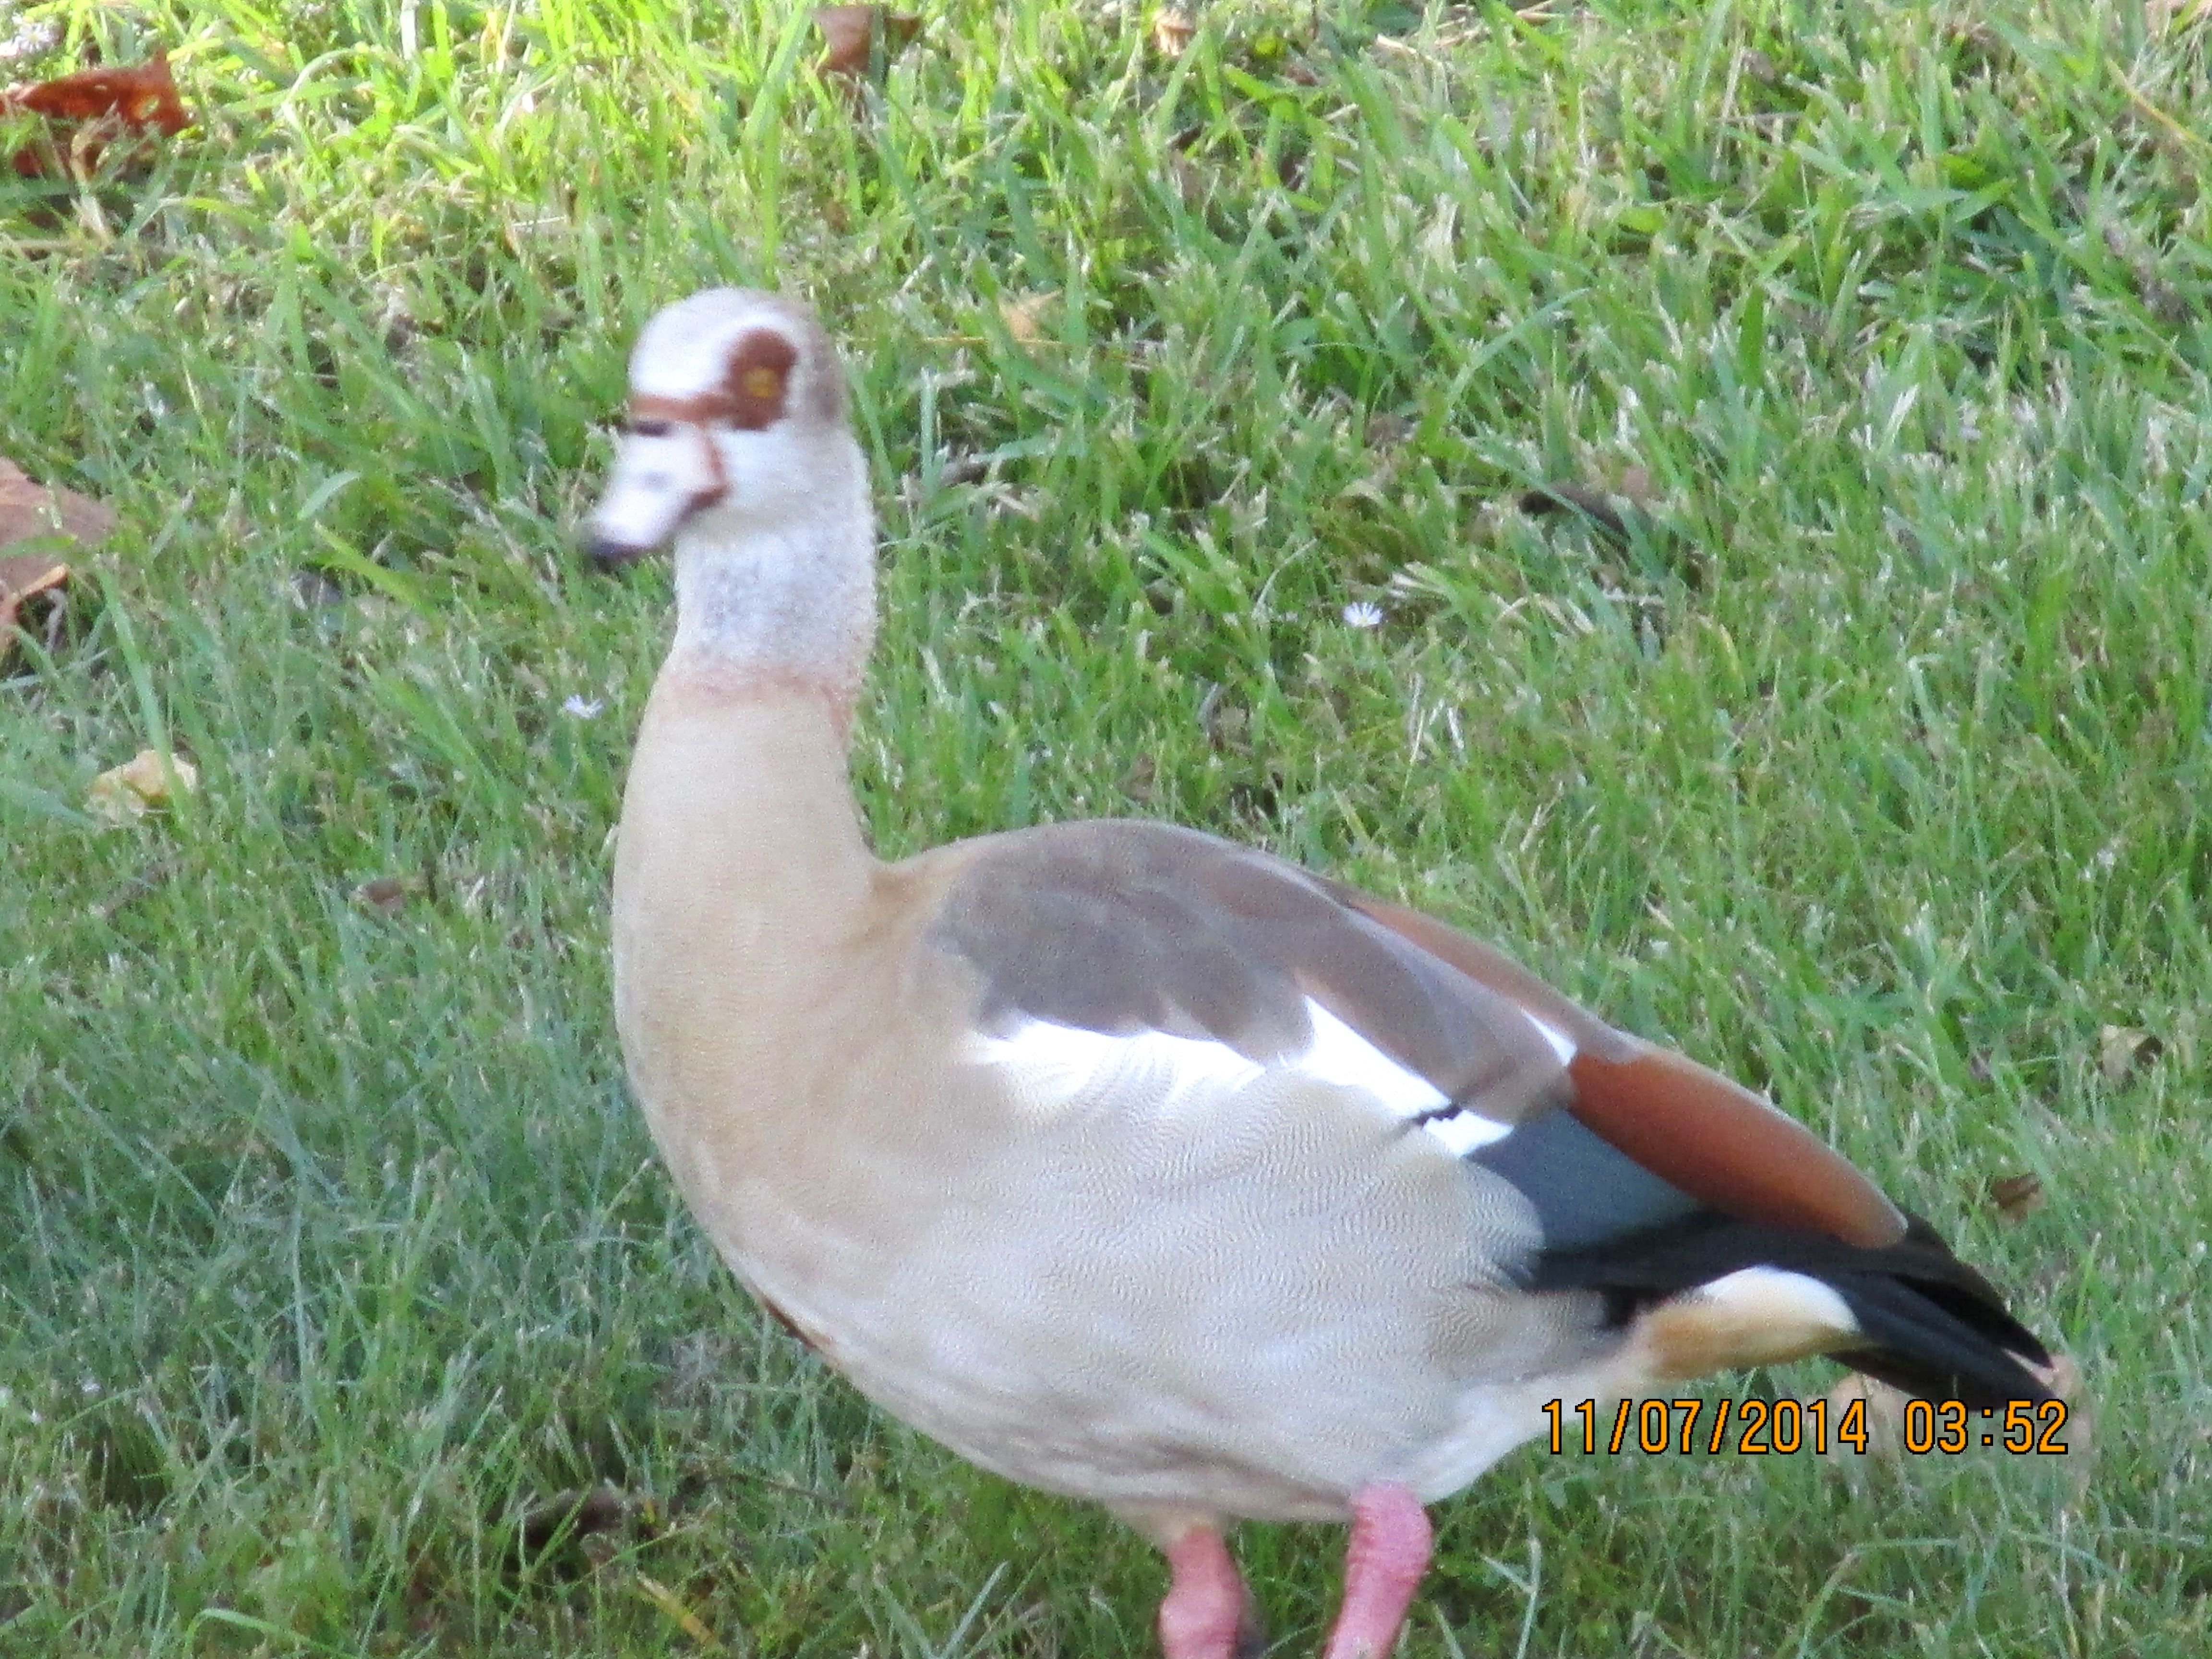 Egyptian goose looking on